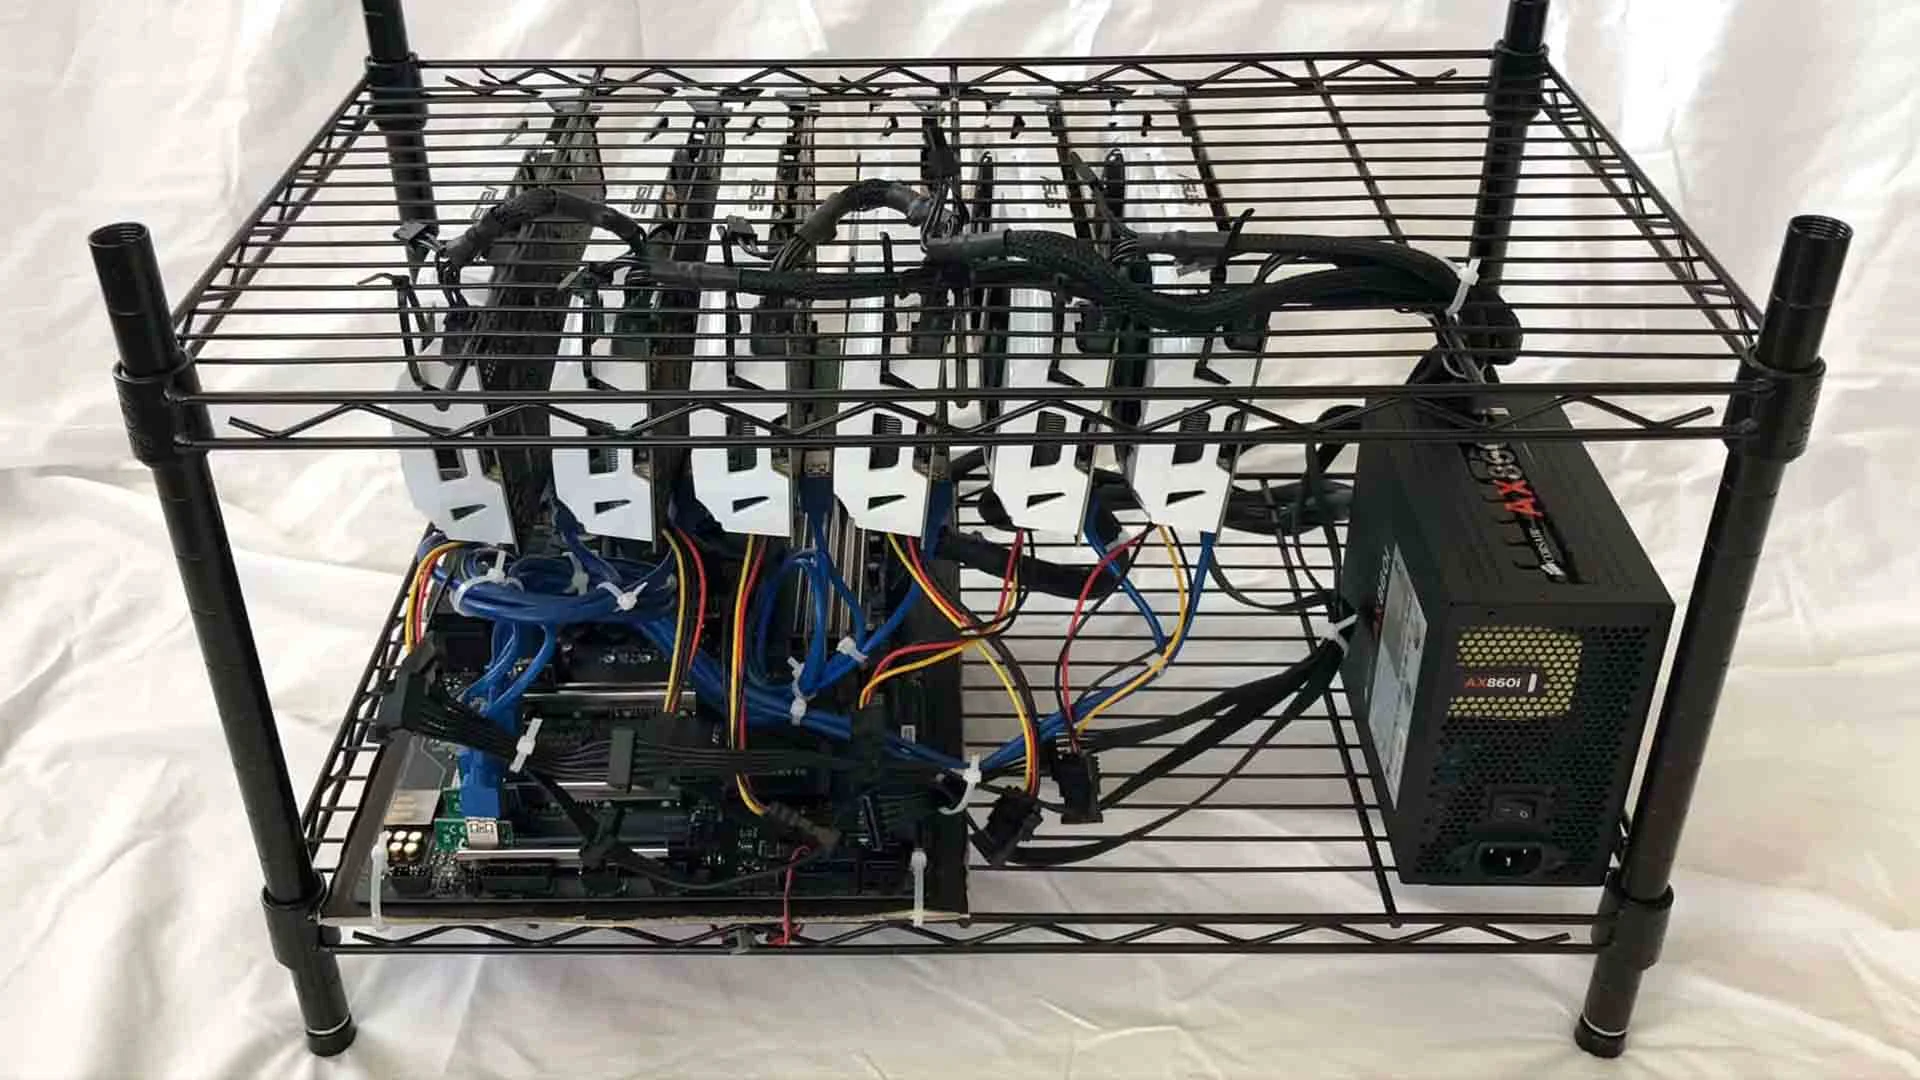 The Complete Guide To Building A Mining Rig